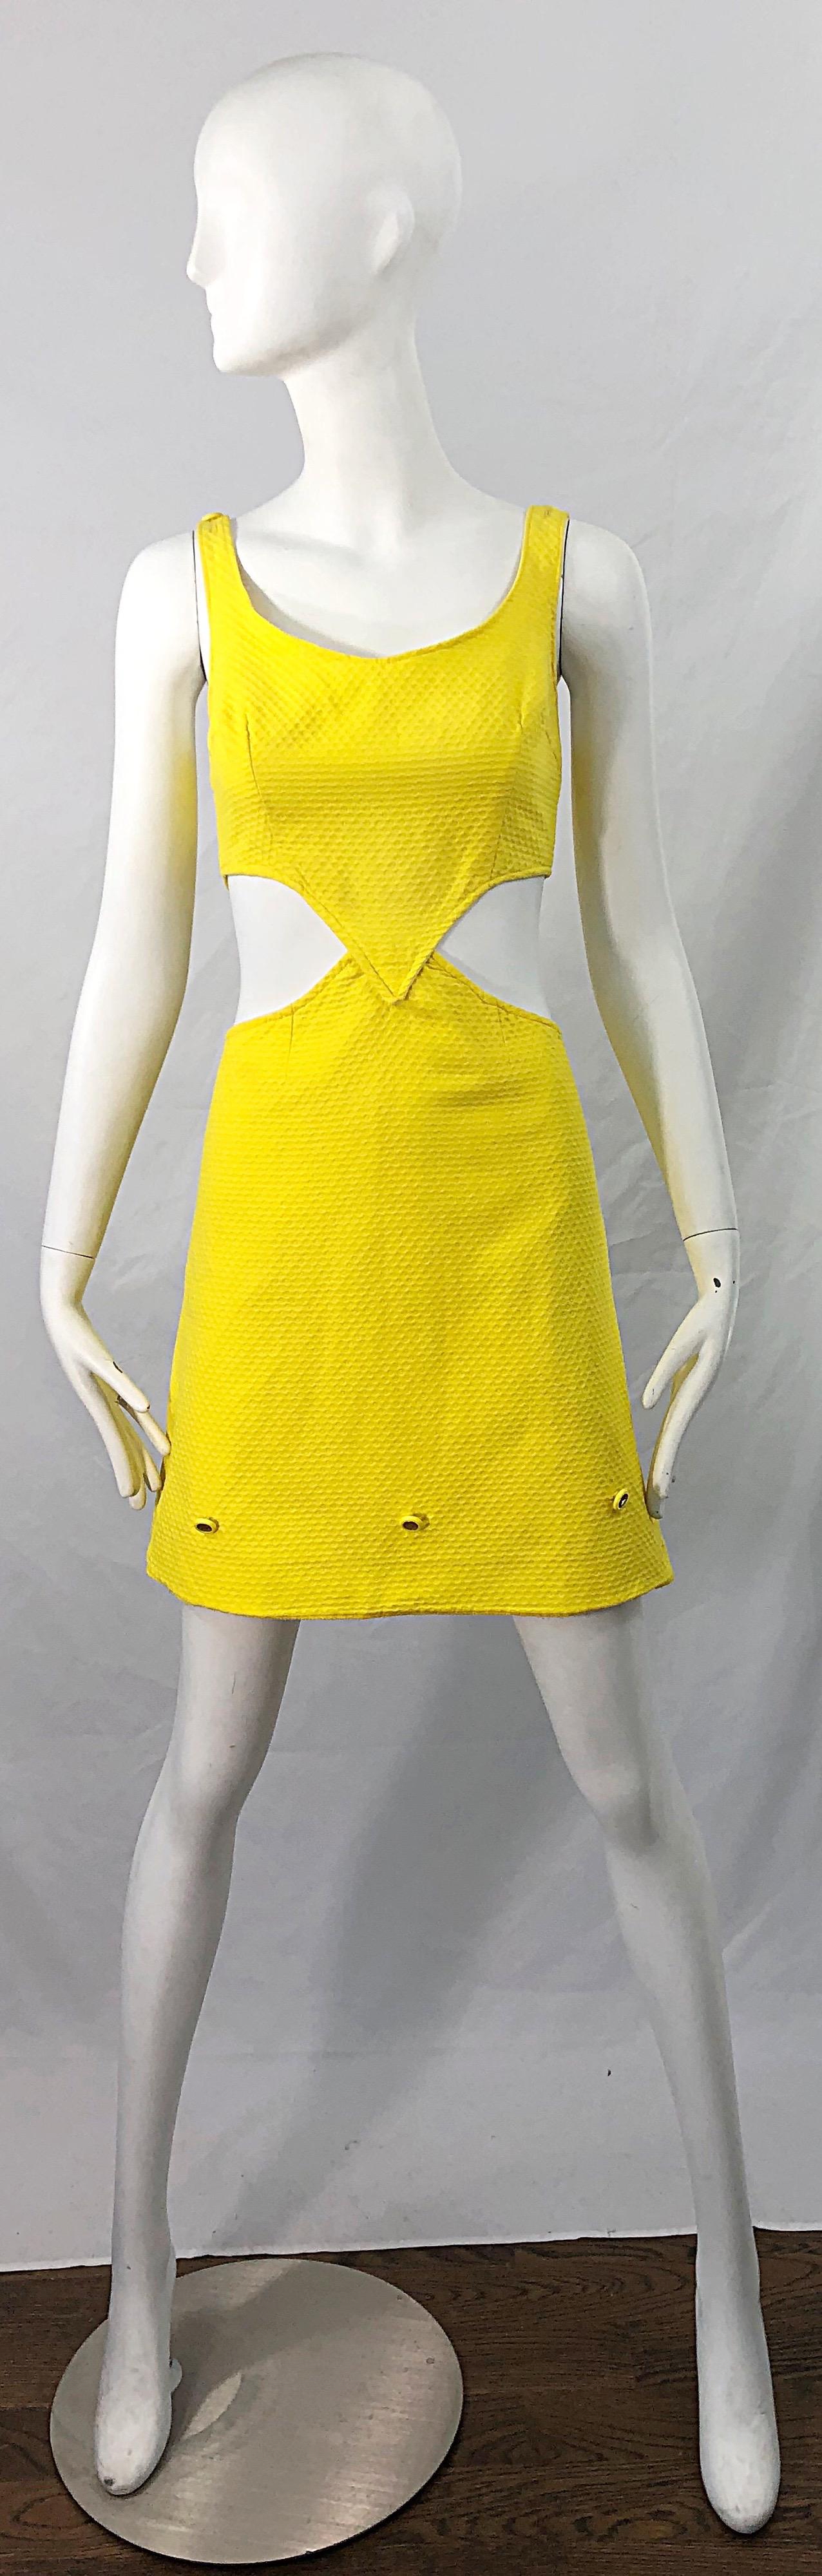 1960s Canary Yellow Cut - Out Honeycomb Cotton Vintage 60s A Line Dress 4